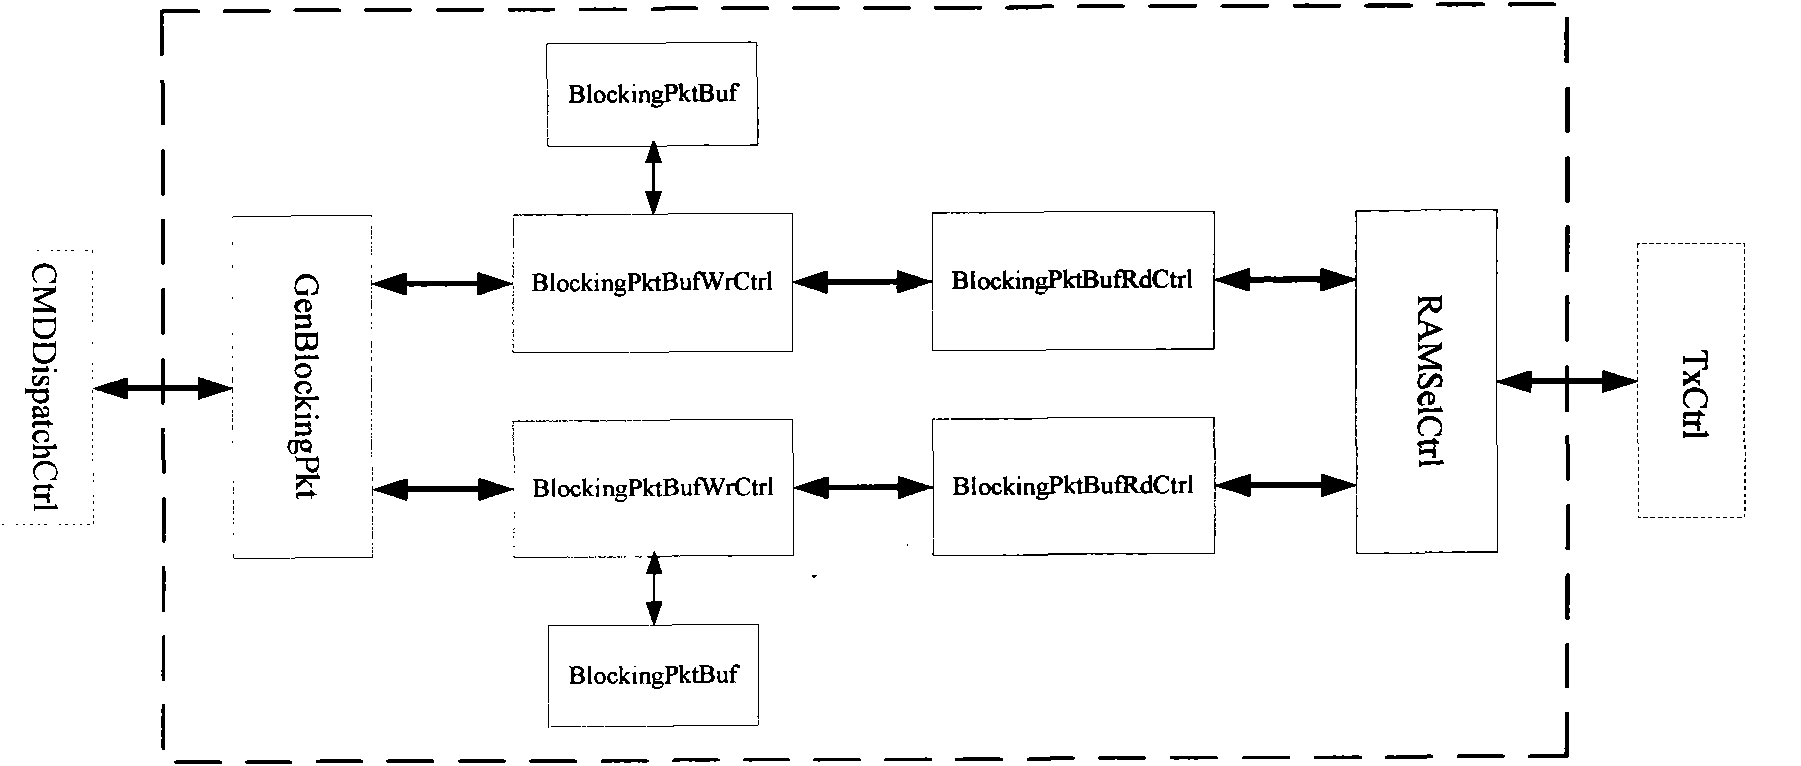 Network security accessing and sealing method based on FPGA (field programmable gate array)